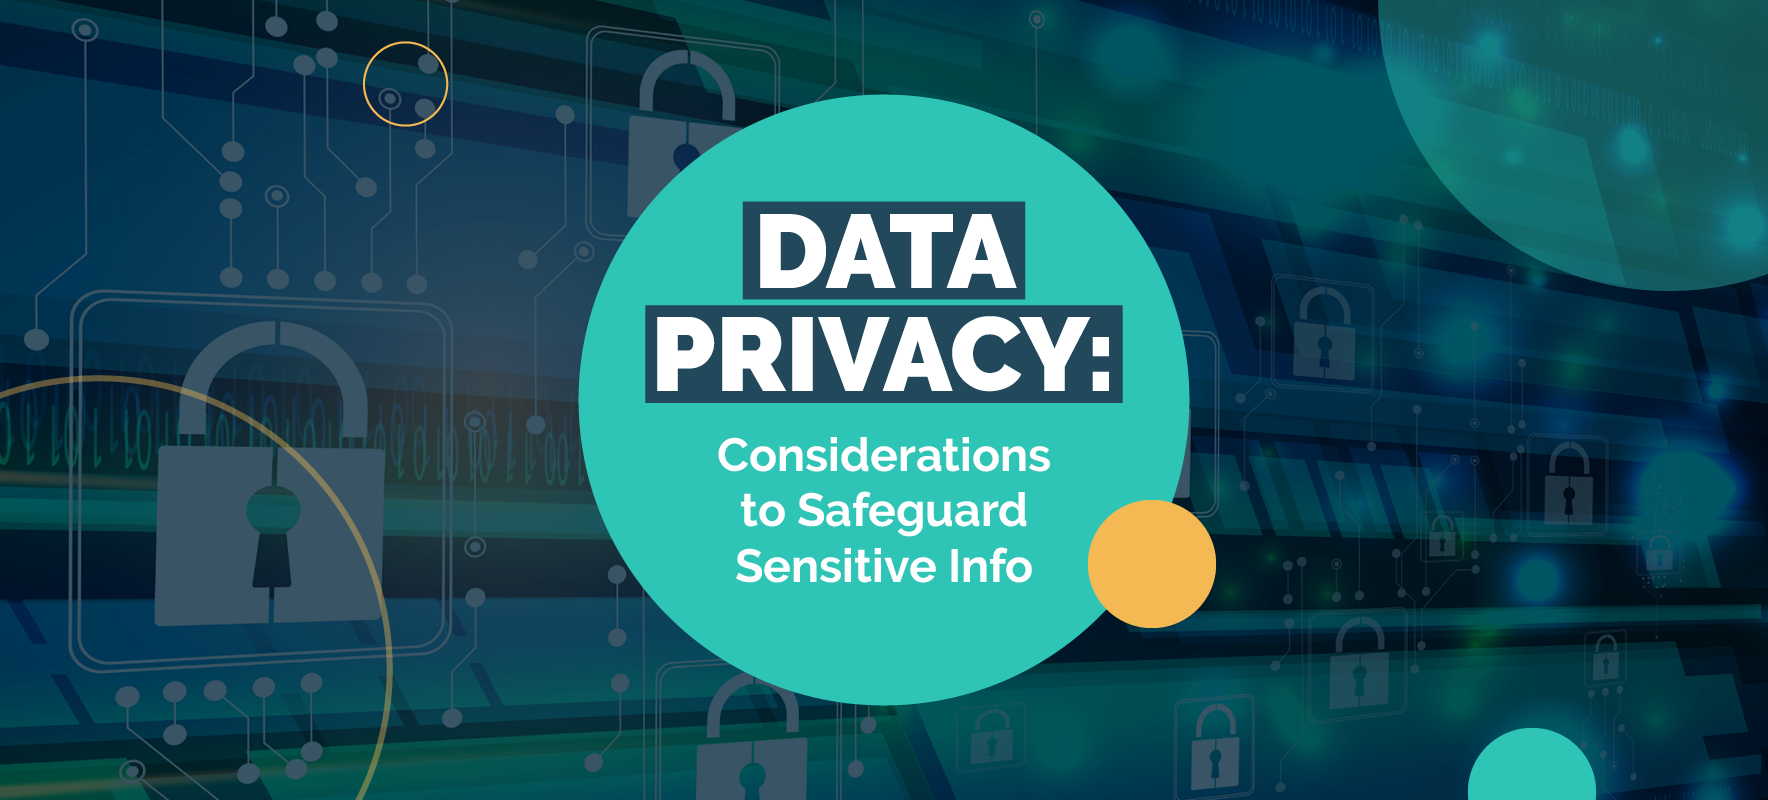 Data Privacy: 3 Considerations to Safeguard Sensitive Info